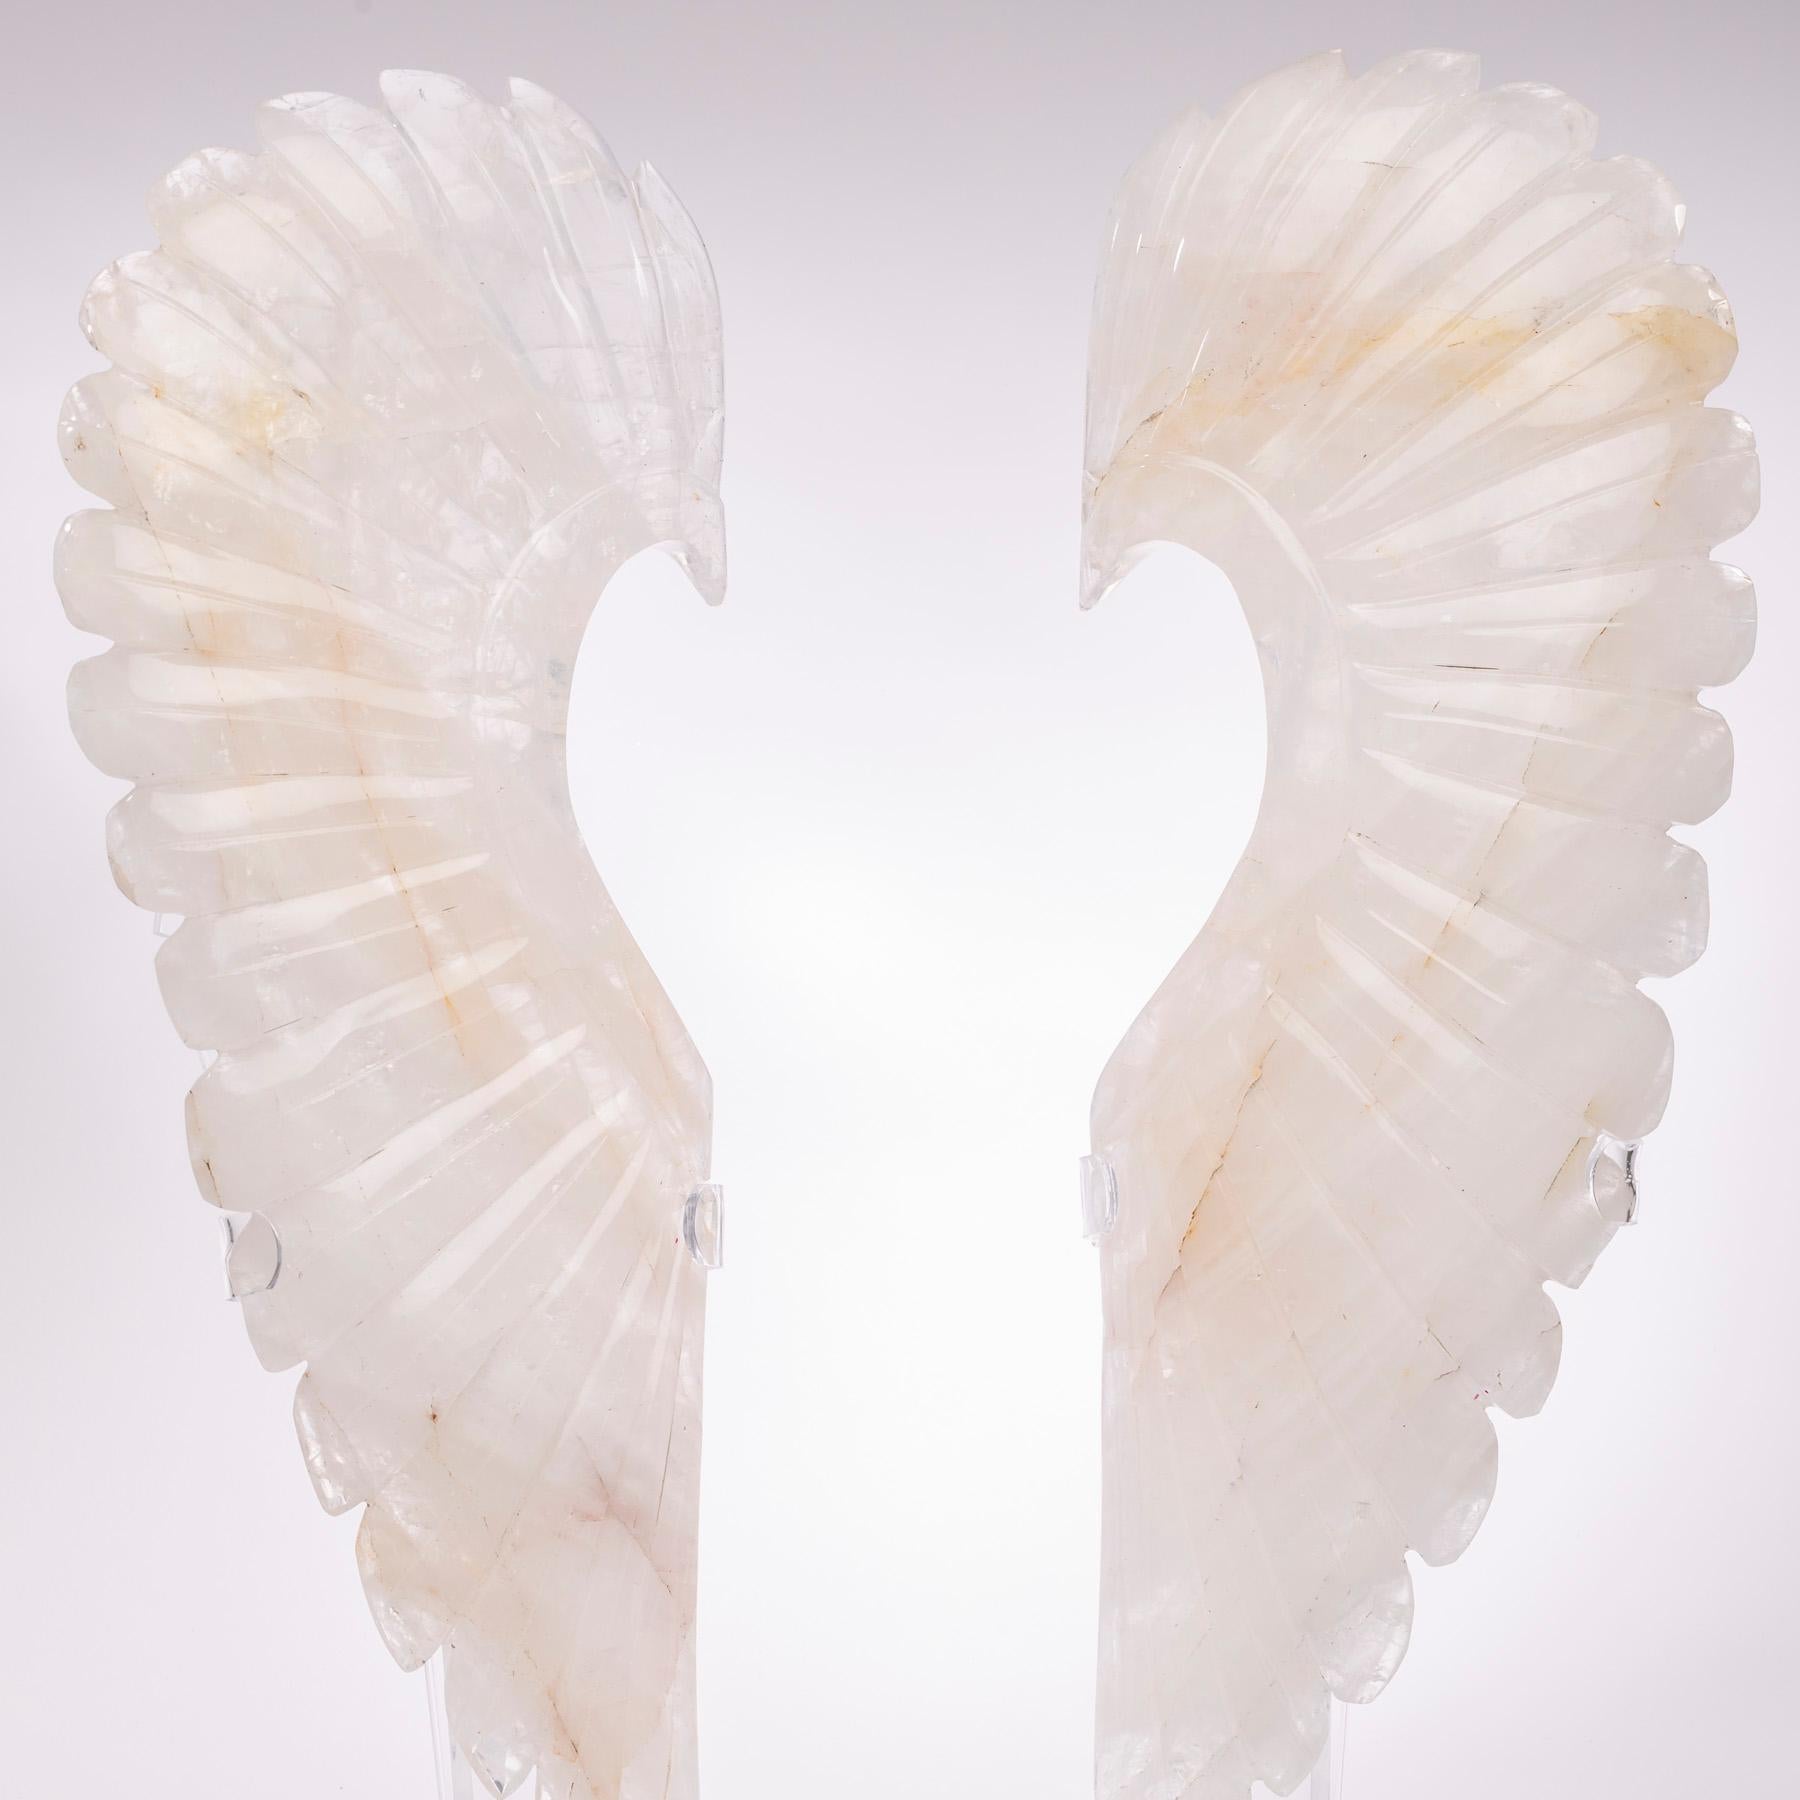 Contemporary Large Hand Carved Brazilian Wings White Quartz Sculpture on Custom Acrylic Stand